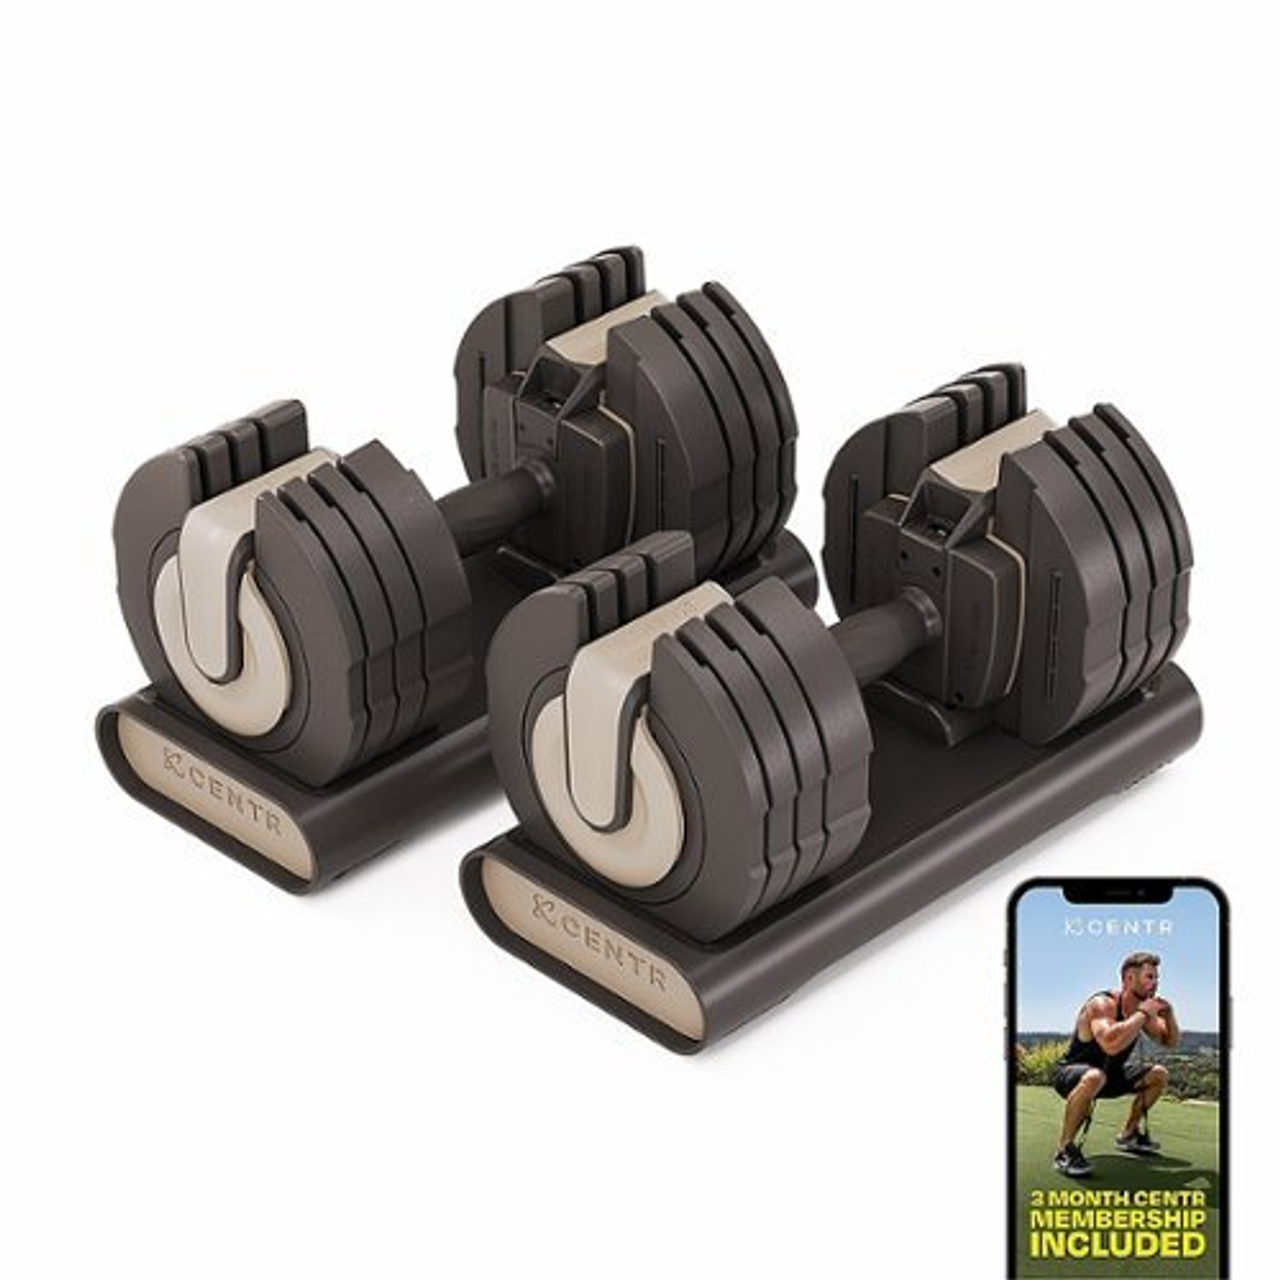 Smart Stack 50 Adjustable Dumbbell Pair with 3-Month Centr Membership - Beige